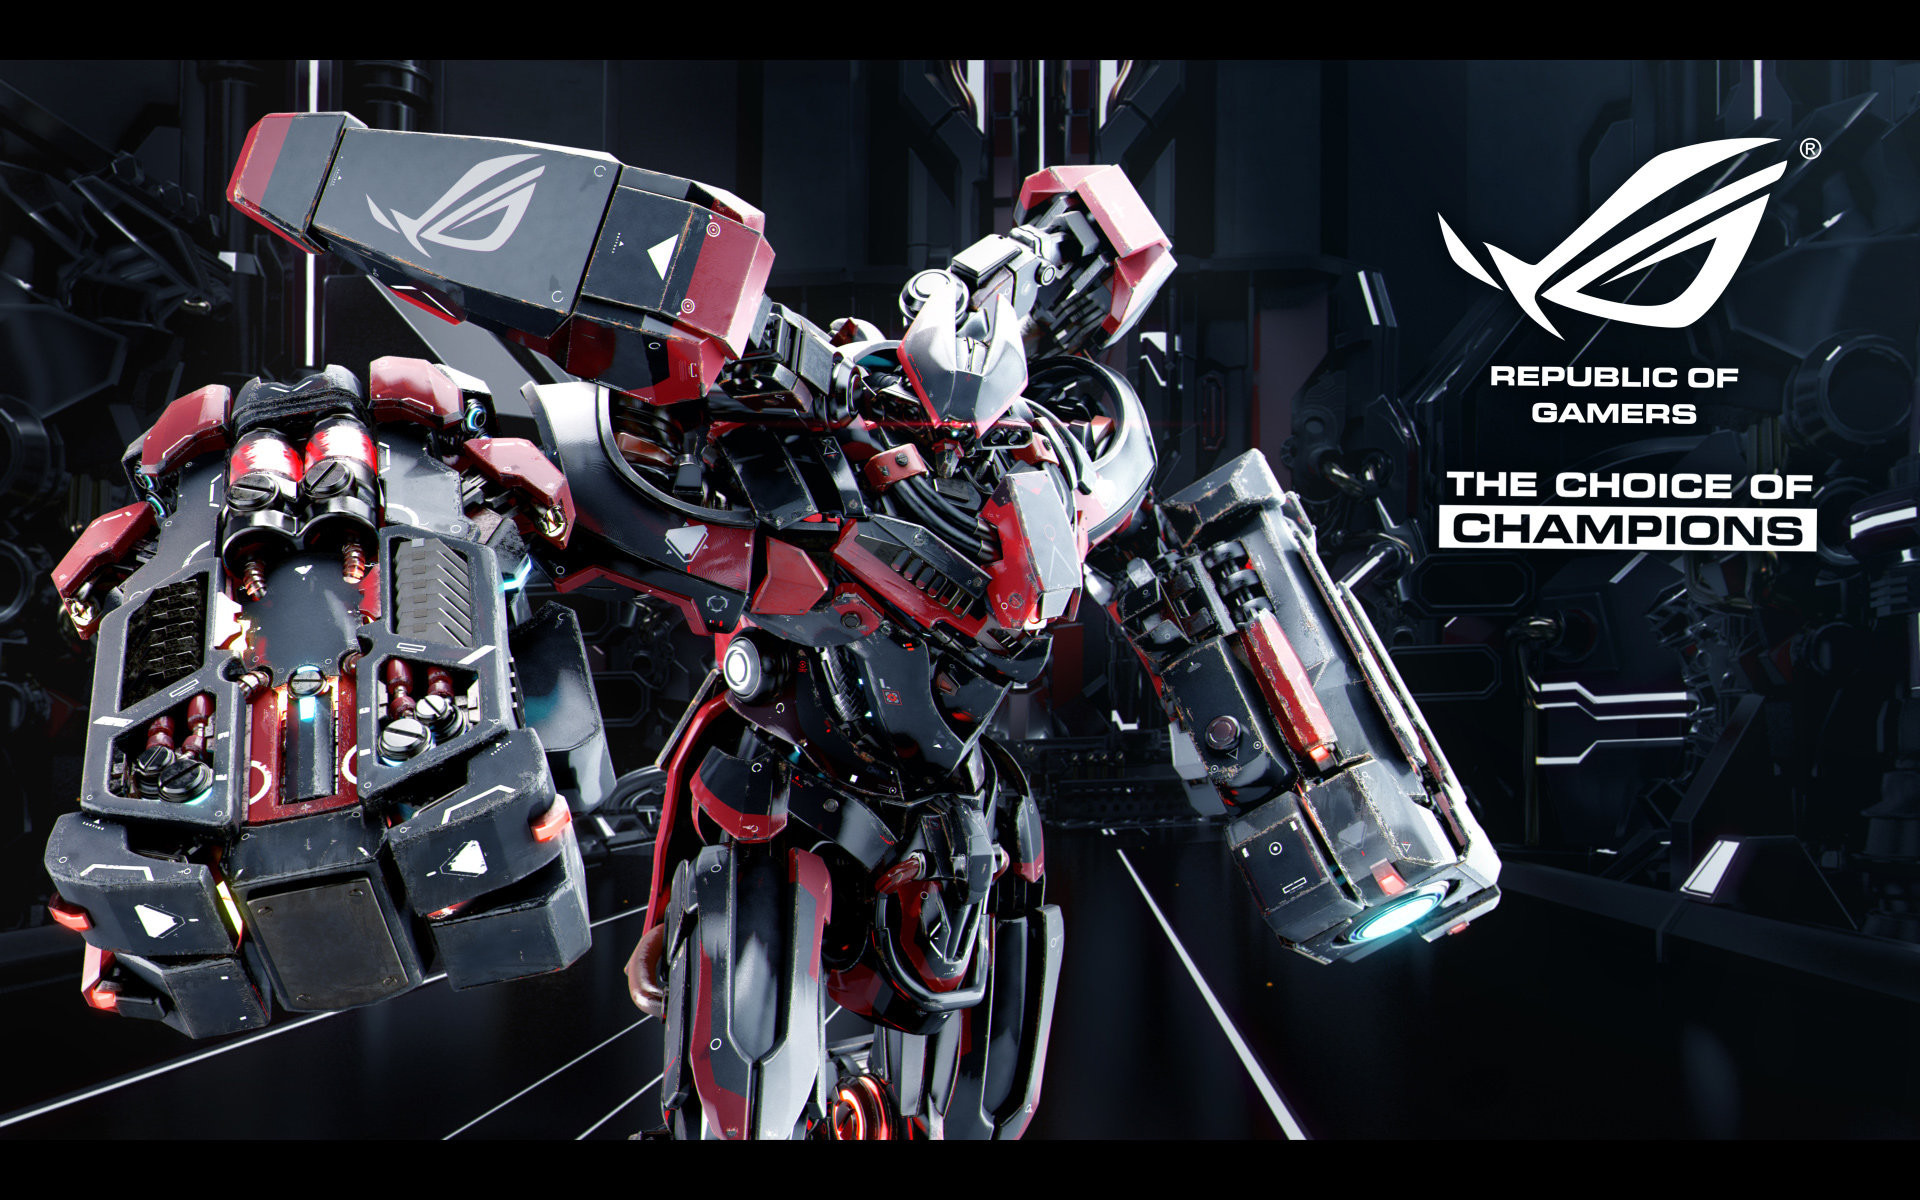 New ROG Wallpapers Mecha – Aug 2013 – WQHD and 4K now available. Archive – ASUS Republic of Gamers ROG The Choice of Champions Overclocking,